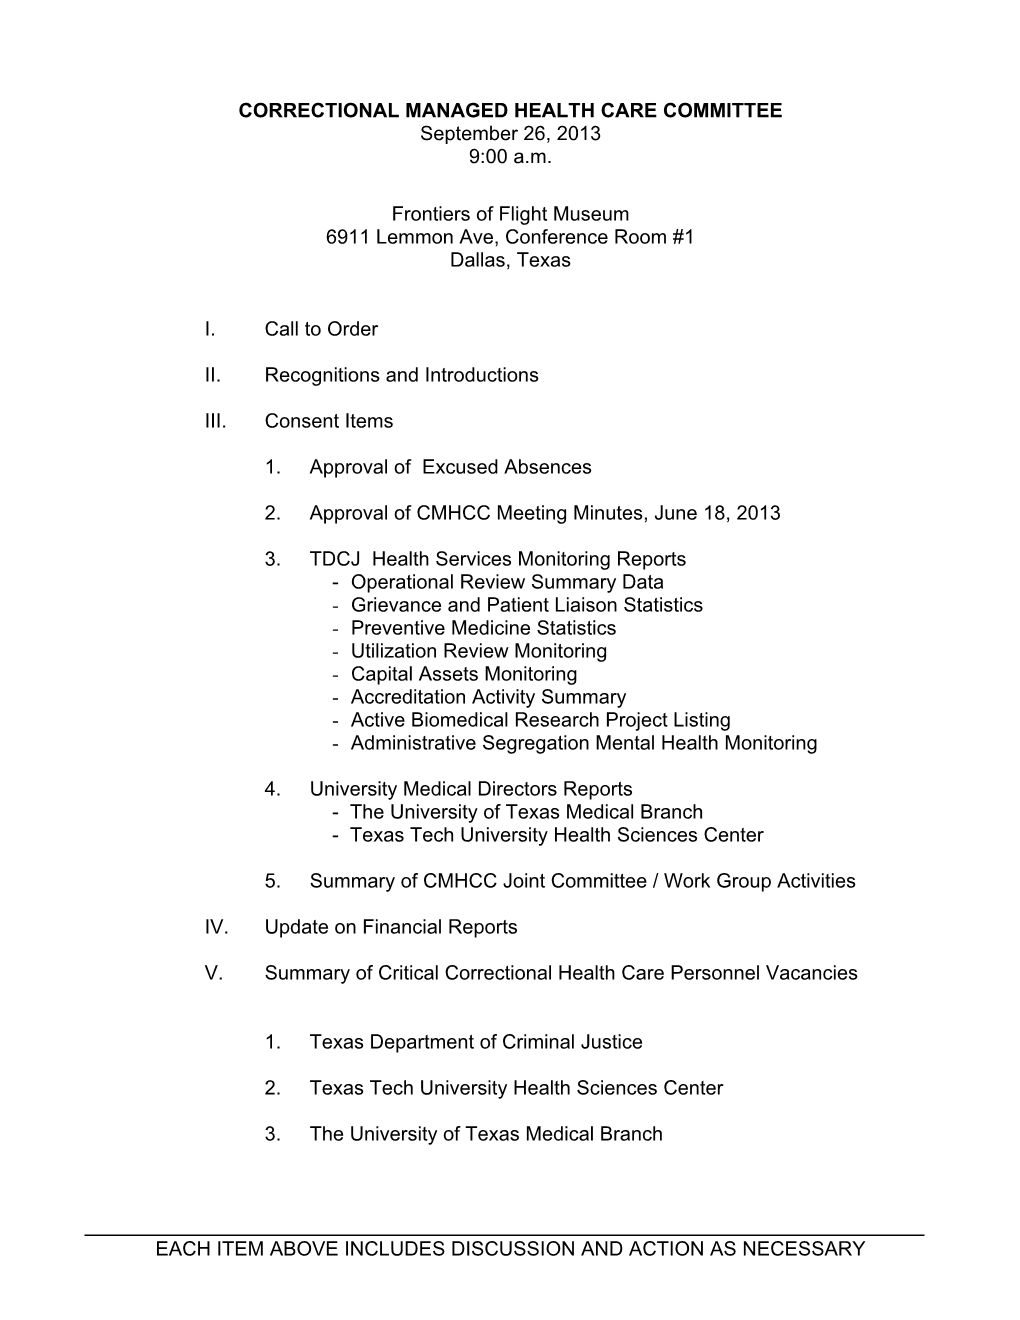 CORRECTIONAL MANAGED HEALTH CARE COMMITTEE September 26, 2013 9:00 A.M